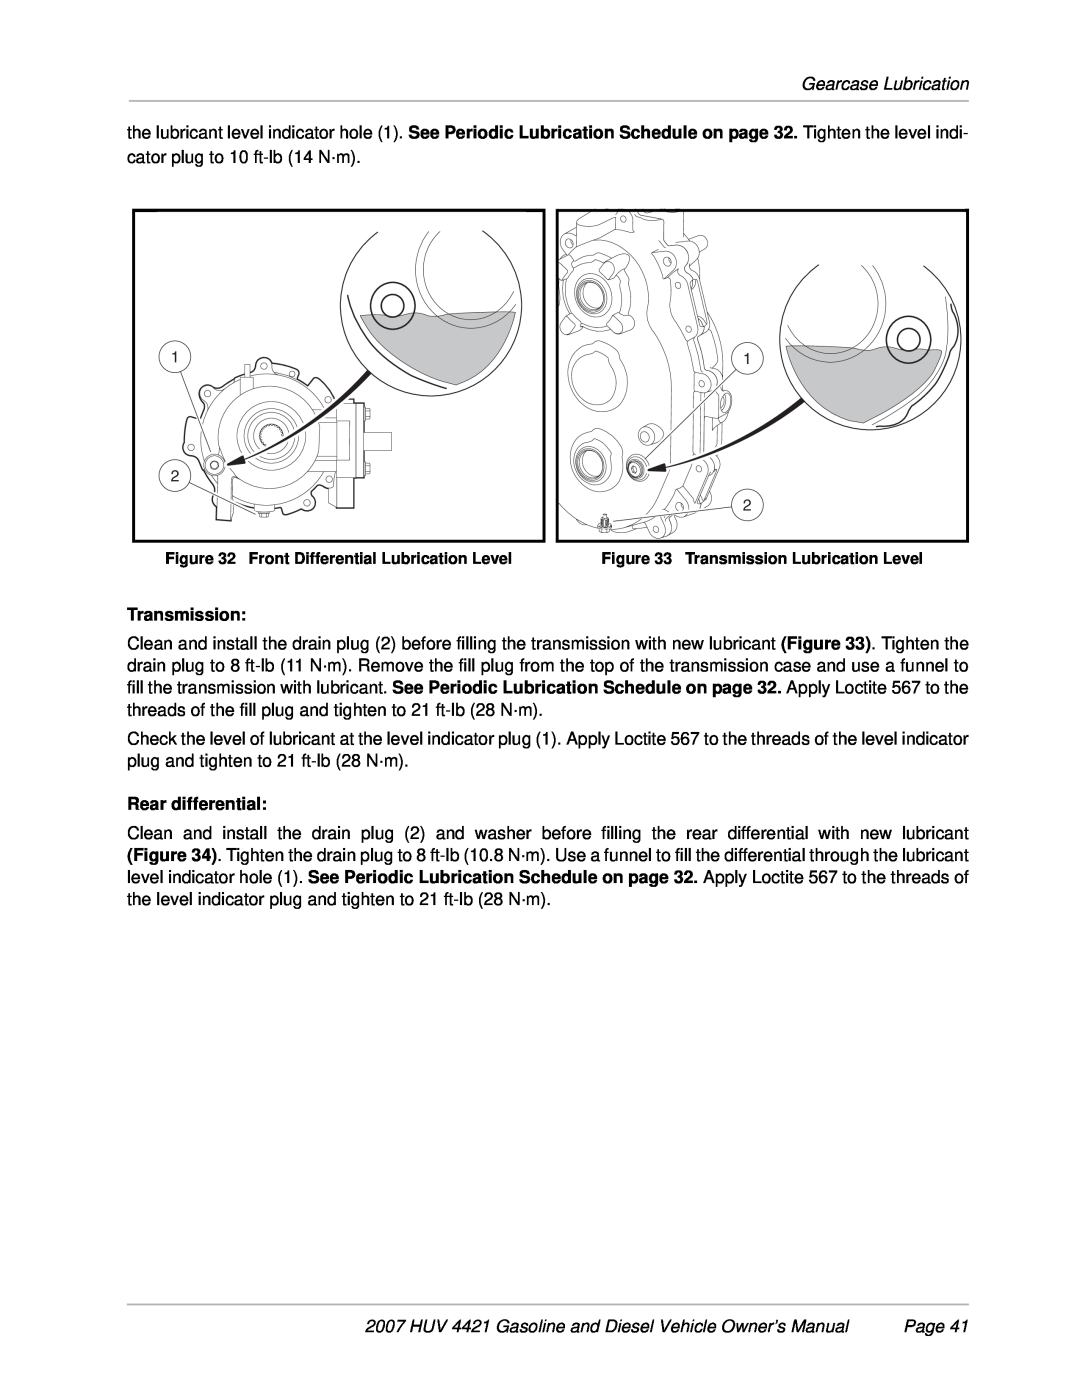 Husqvarna HUV 4421-D / DXP owner manual Gearcase Lubrication, Rear differential, Page, Transmission Lubrication Level 